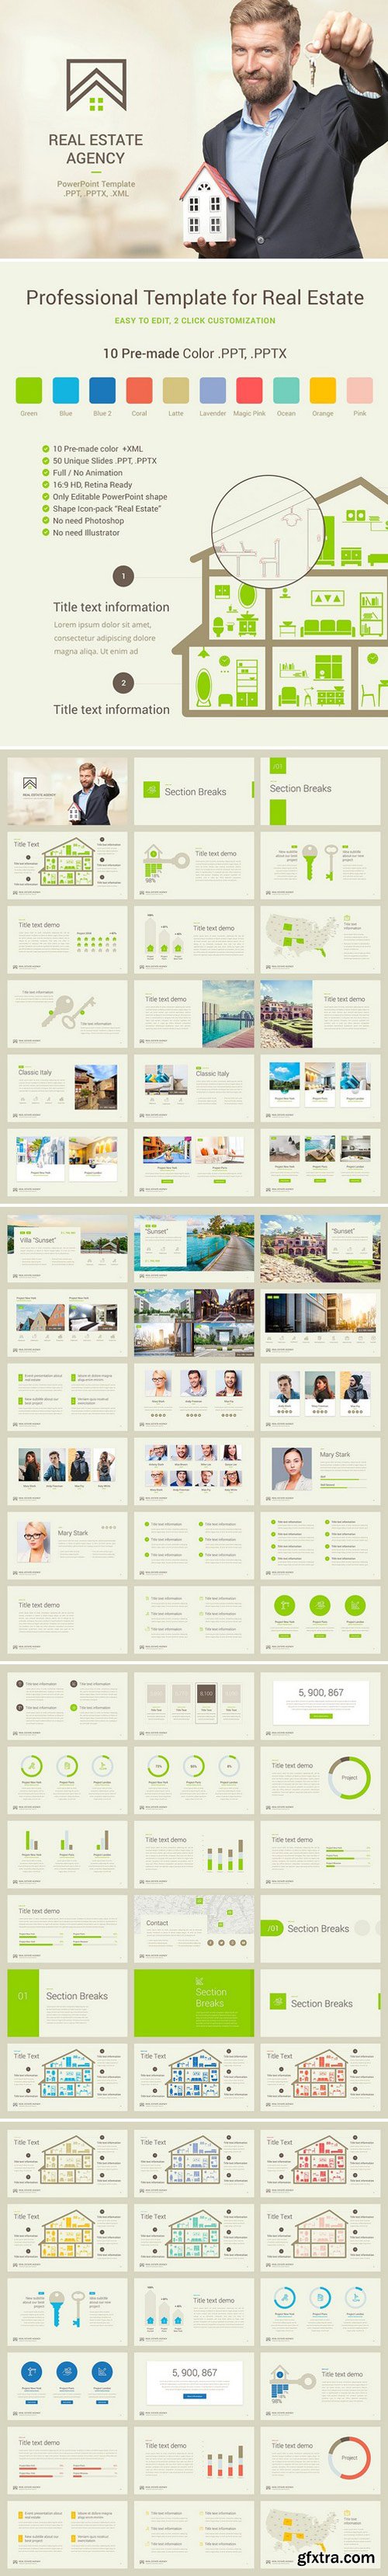 CM - Real Estate PowerPoint Template 2042501